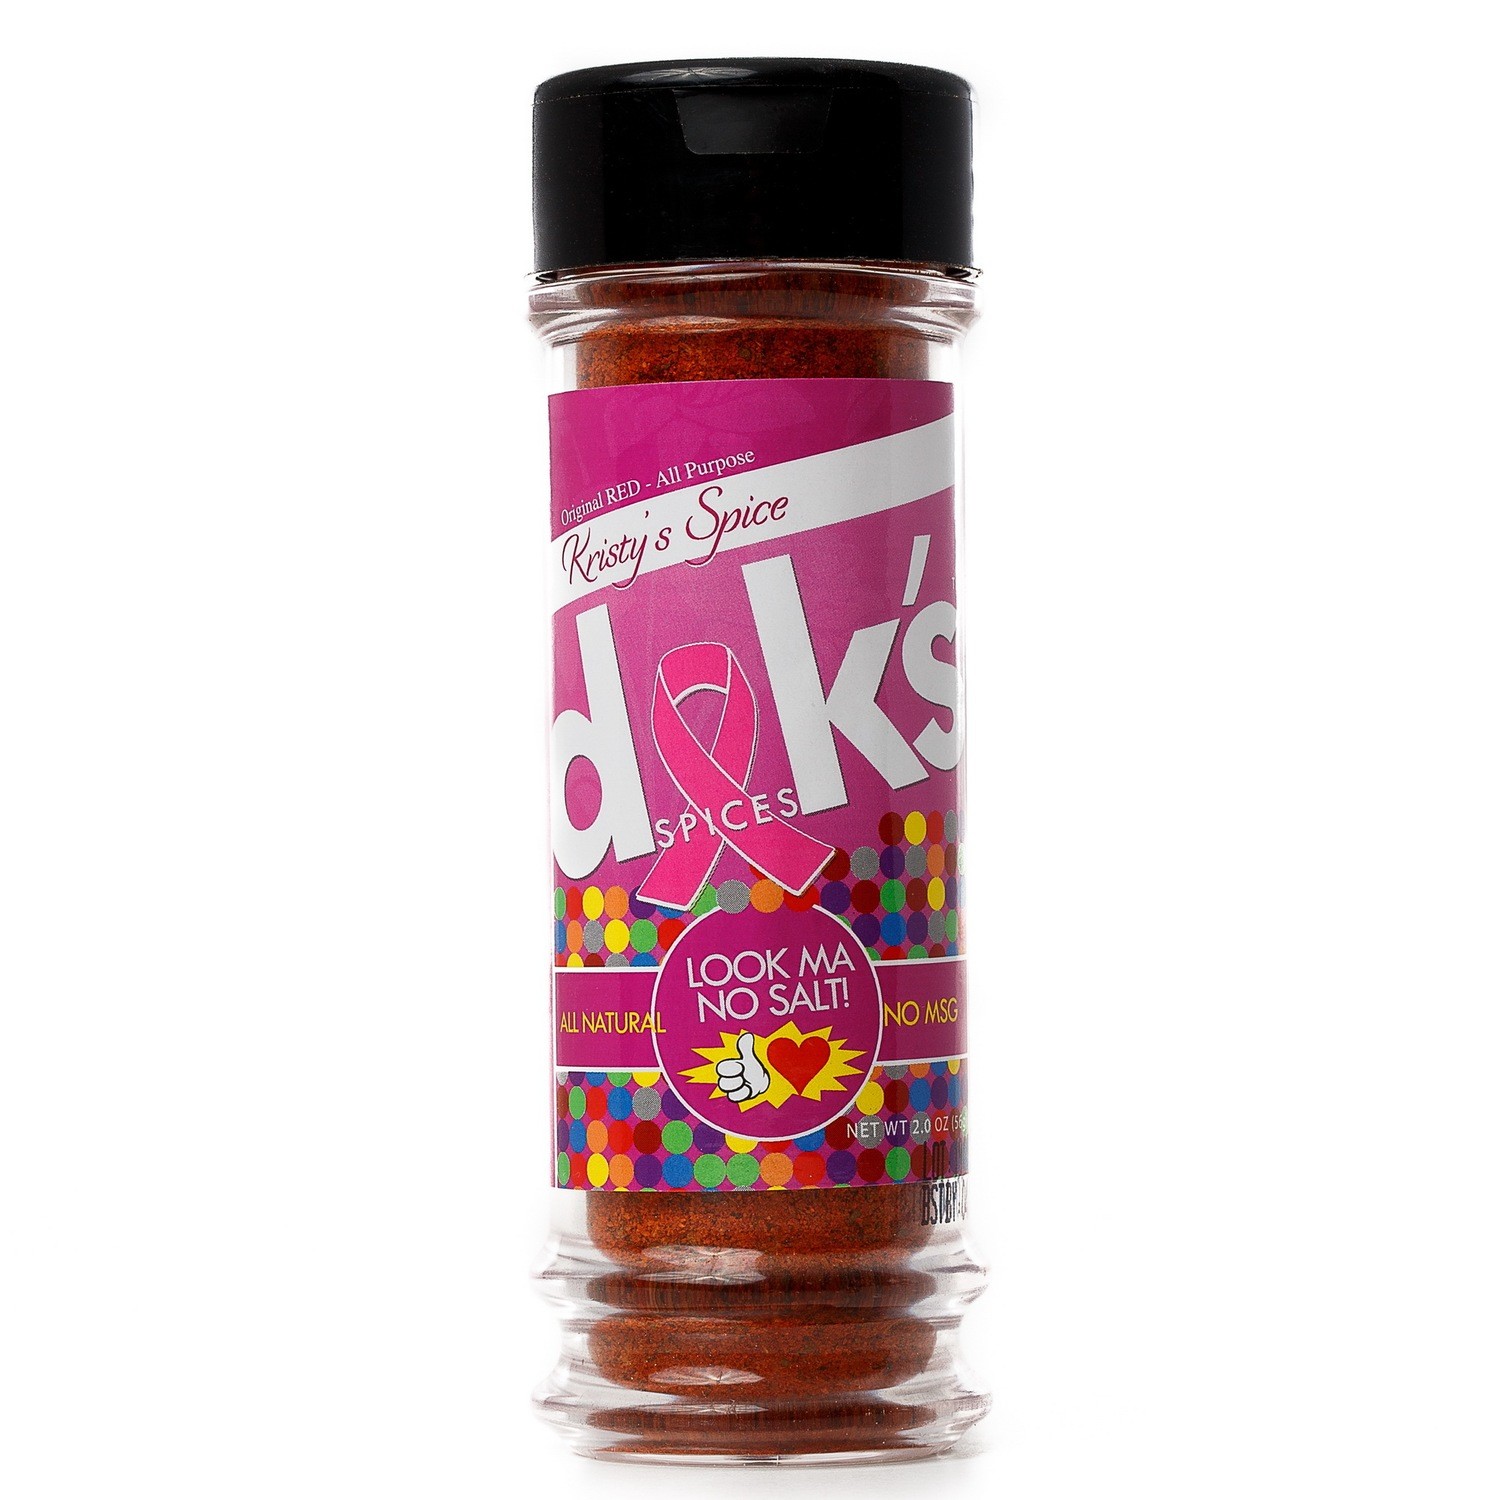 KRISTY'S SPICE - IT'S DAK'S ORIGINAL RED SEASONING FOR A GOOD CAUSE *EXP DATE 04/22/2021*